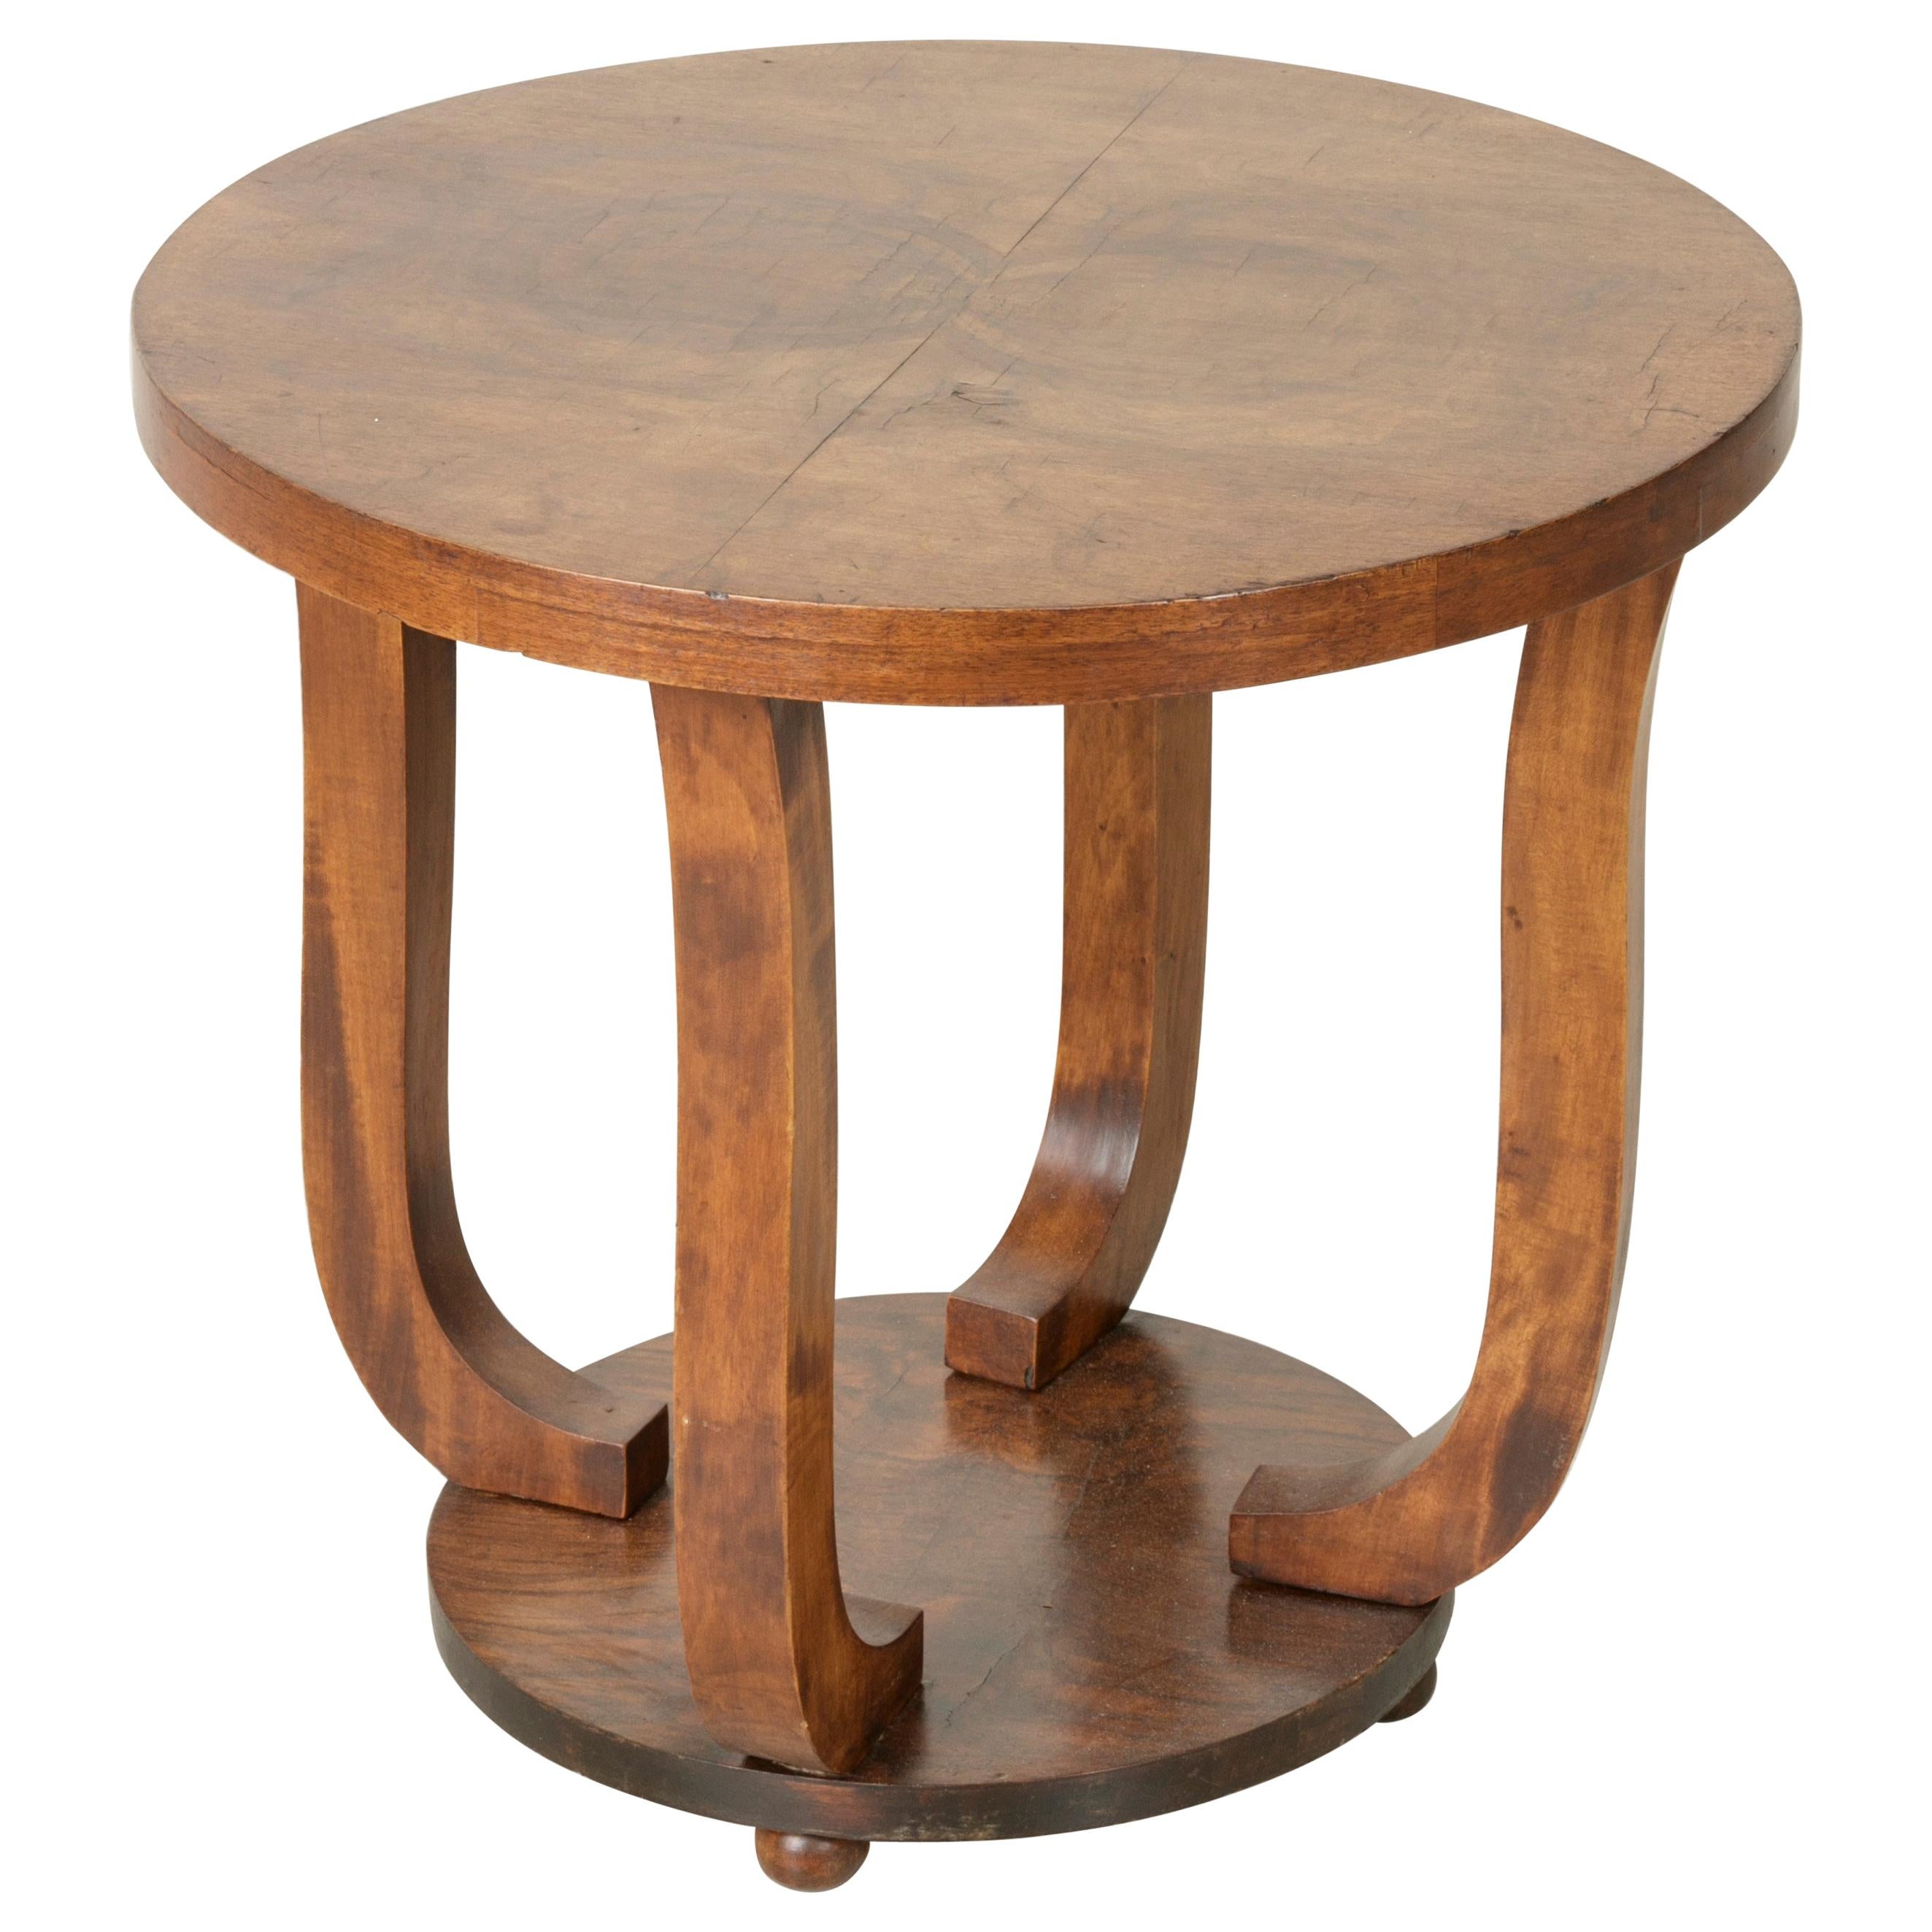 Early 20th Century French Art Deco Period Burl Walnut Guéridon or Side Table